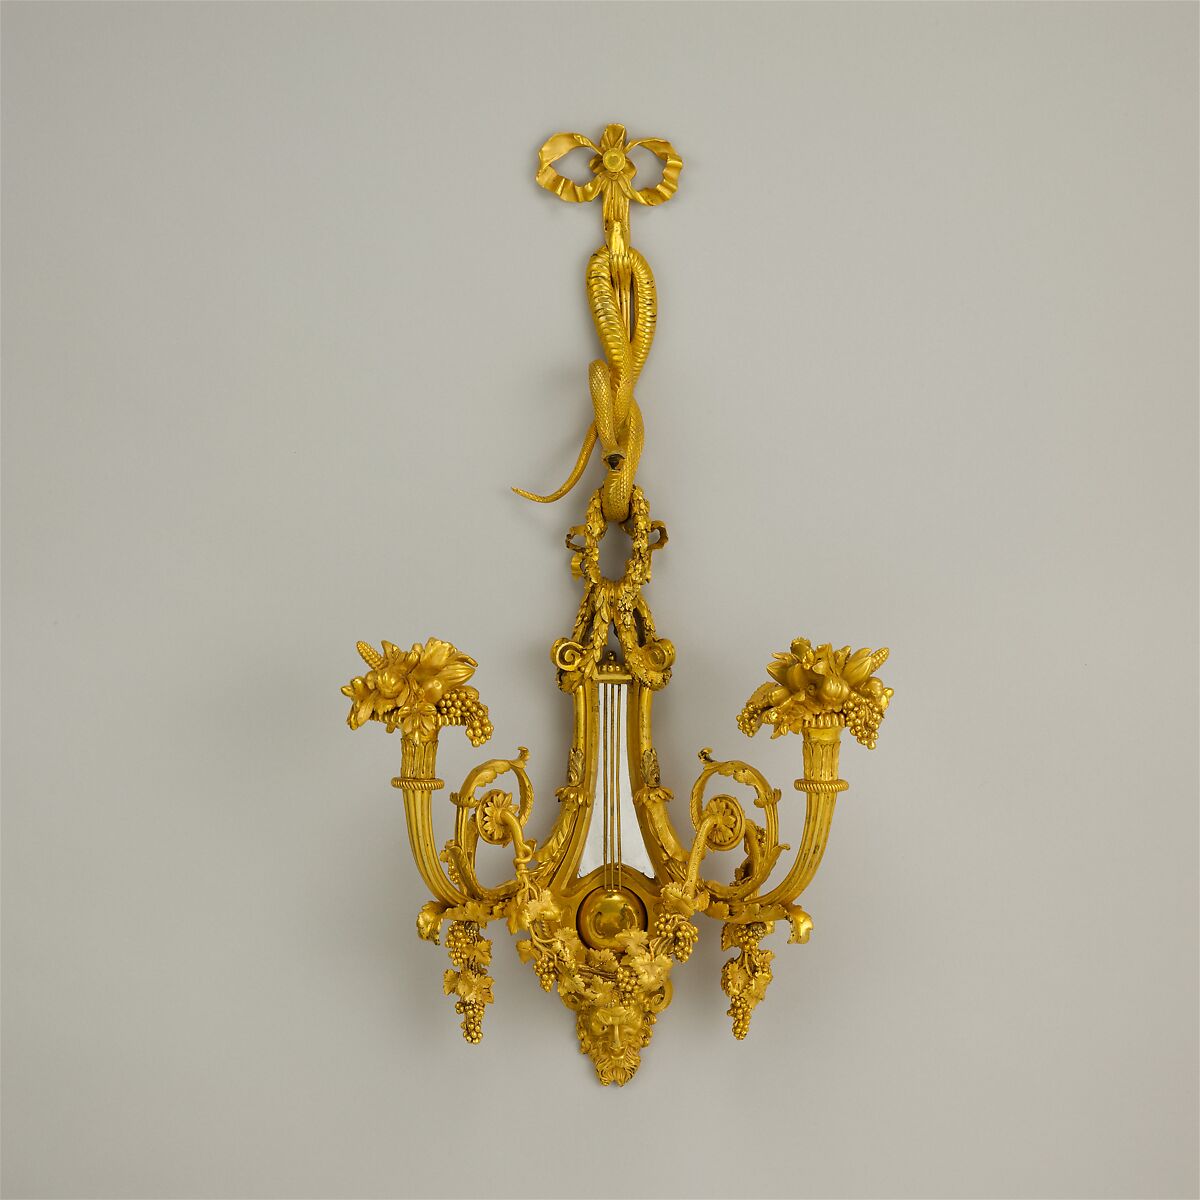 Pair of two-light wall brackets, Gilt bronze, French 